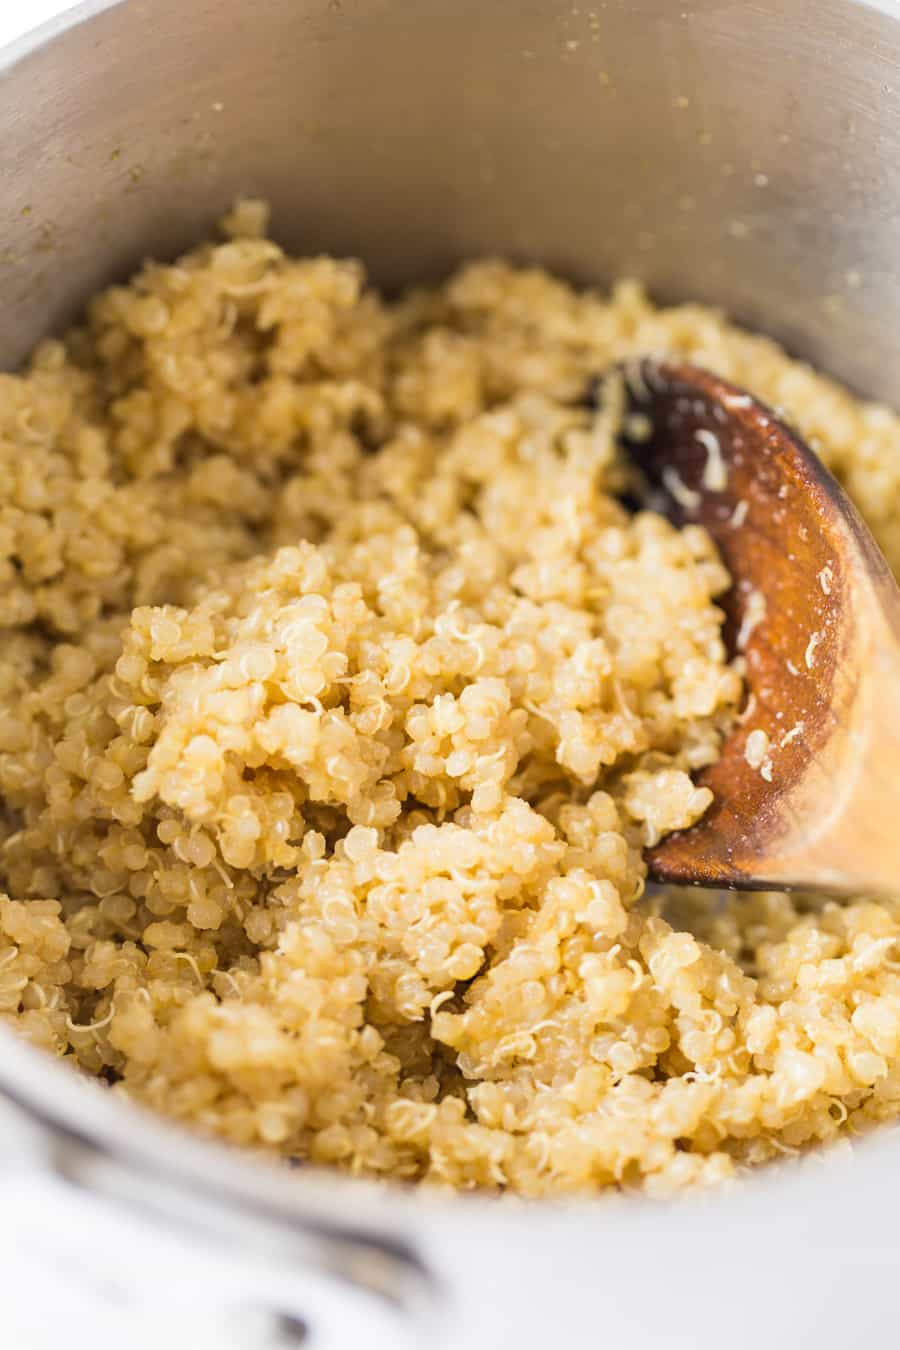 The FLUFFIEST Garlic Butter Quinoa made with just 5 simple ingredients!